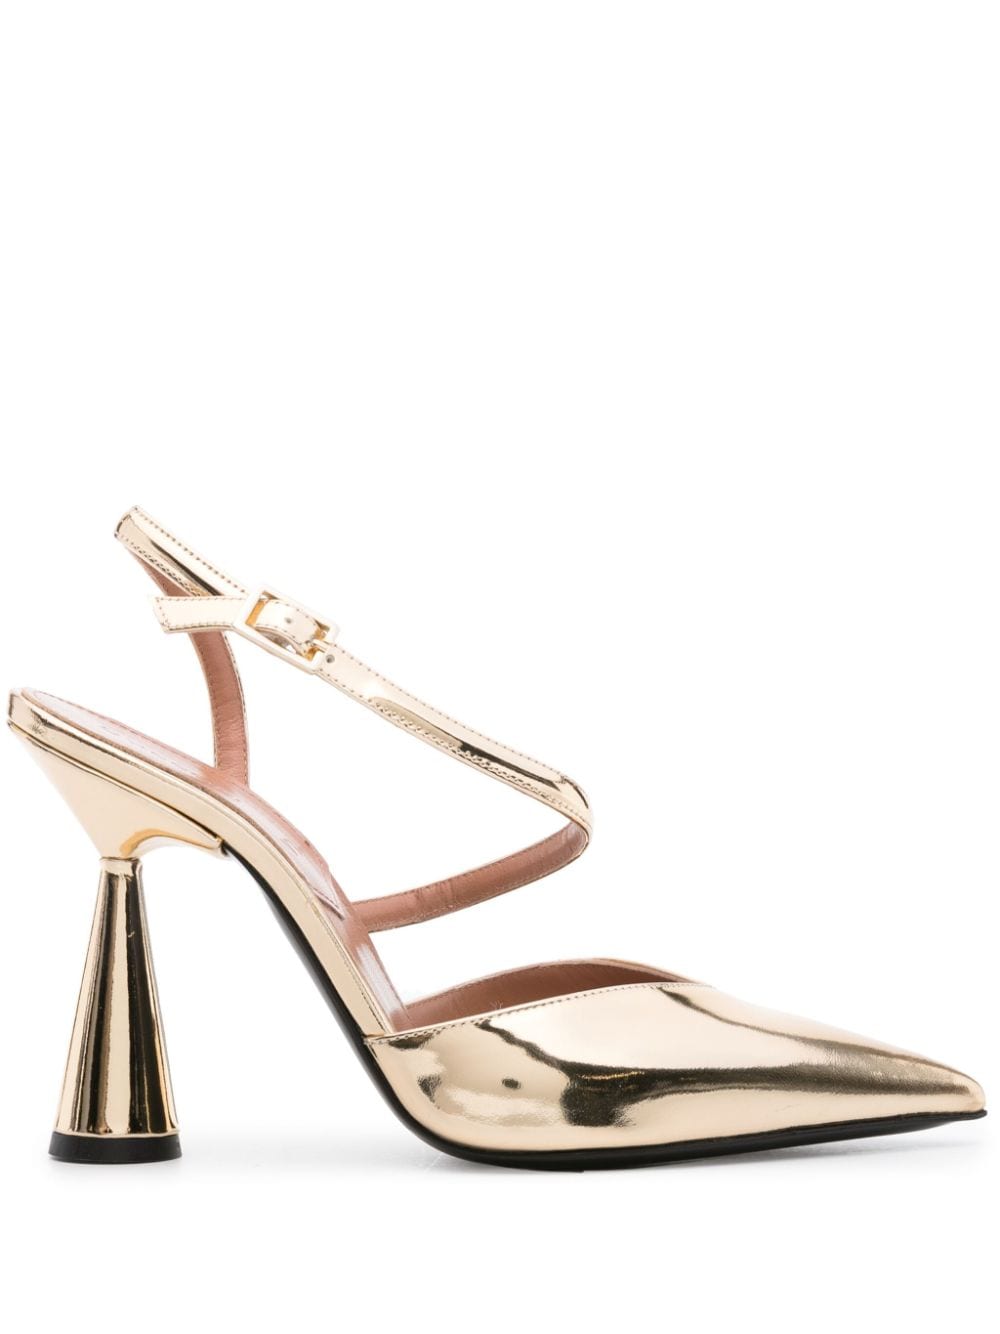 D’accori Arya 100mm Patent-leather Pumps In Gold